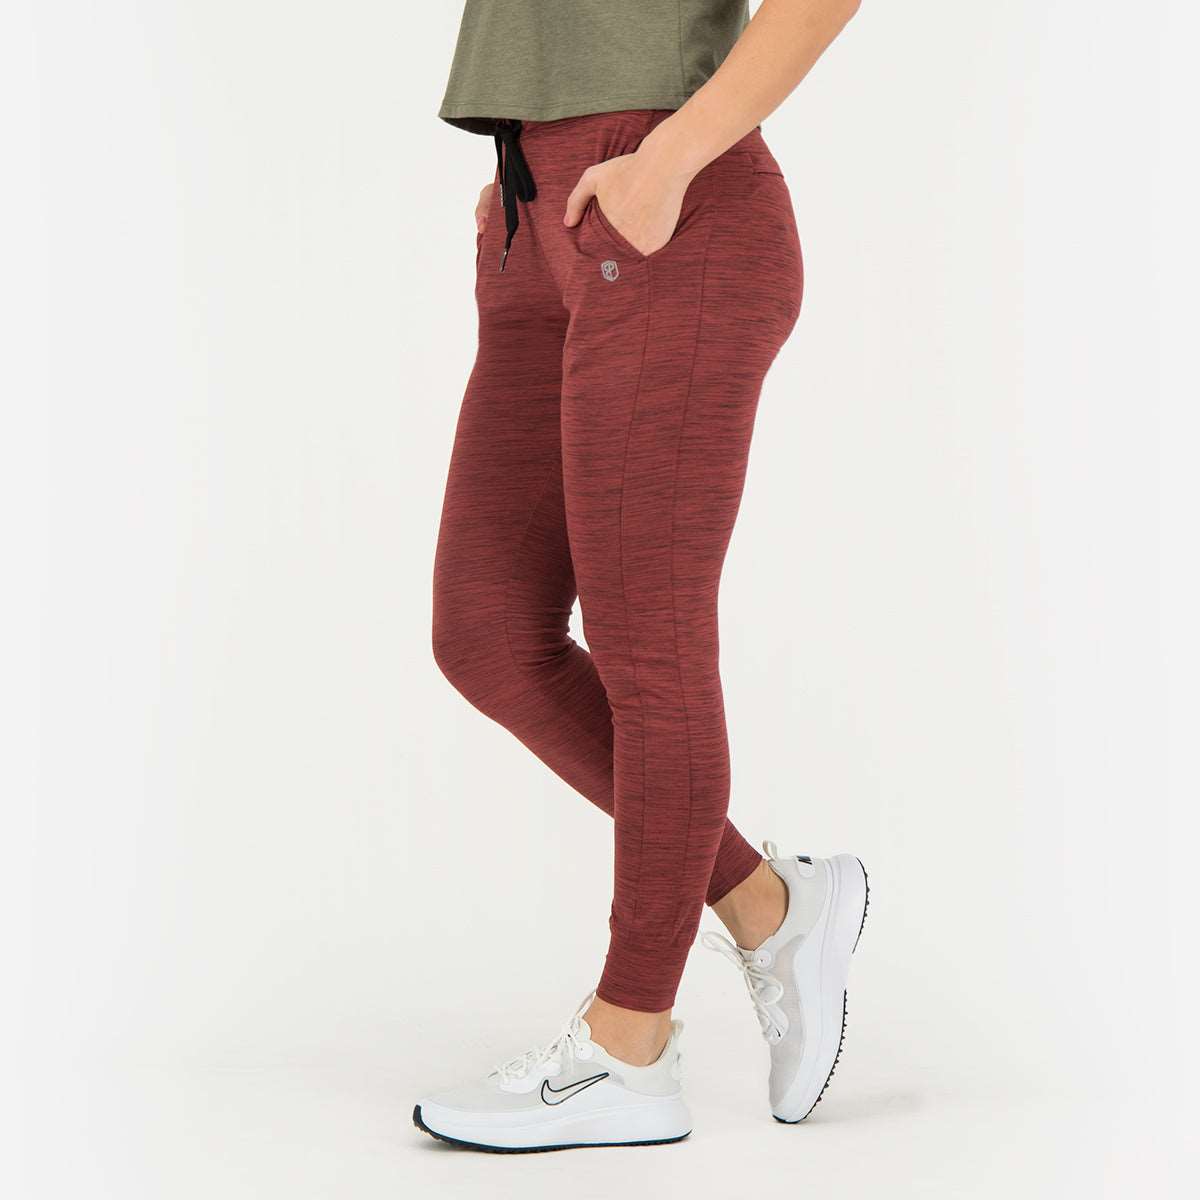 Female Rest Day Athleisure Joggers (Maroon)